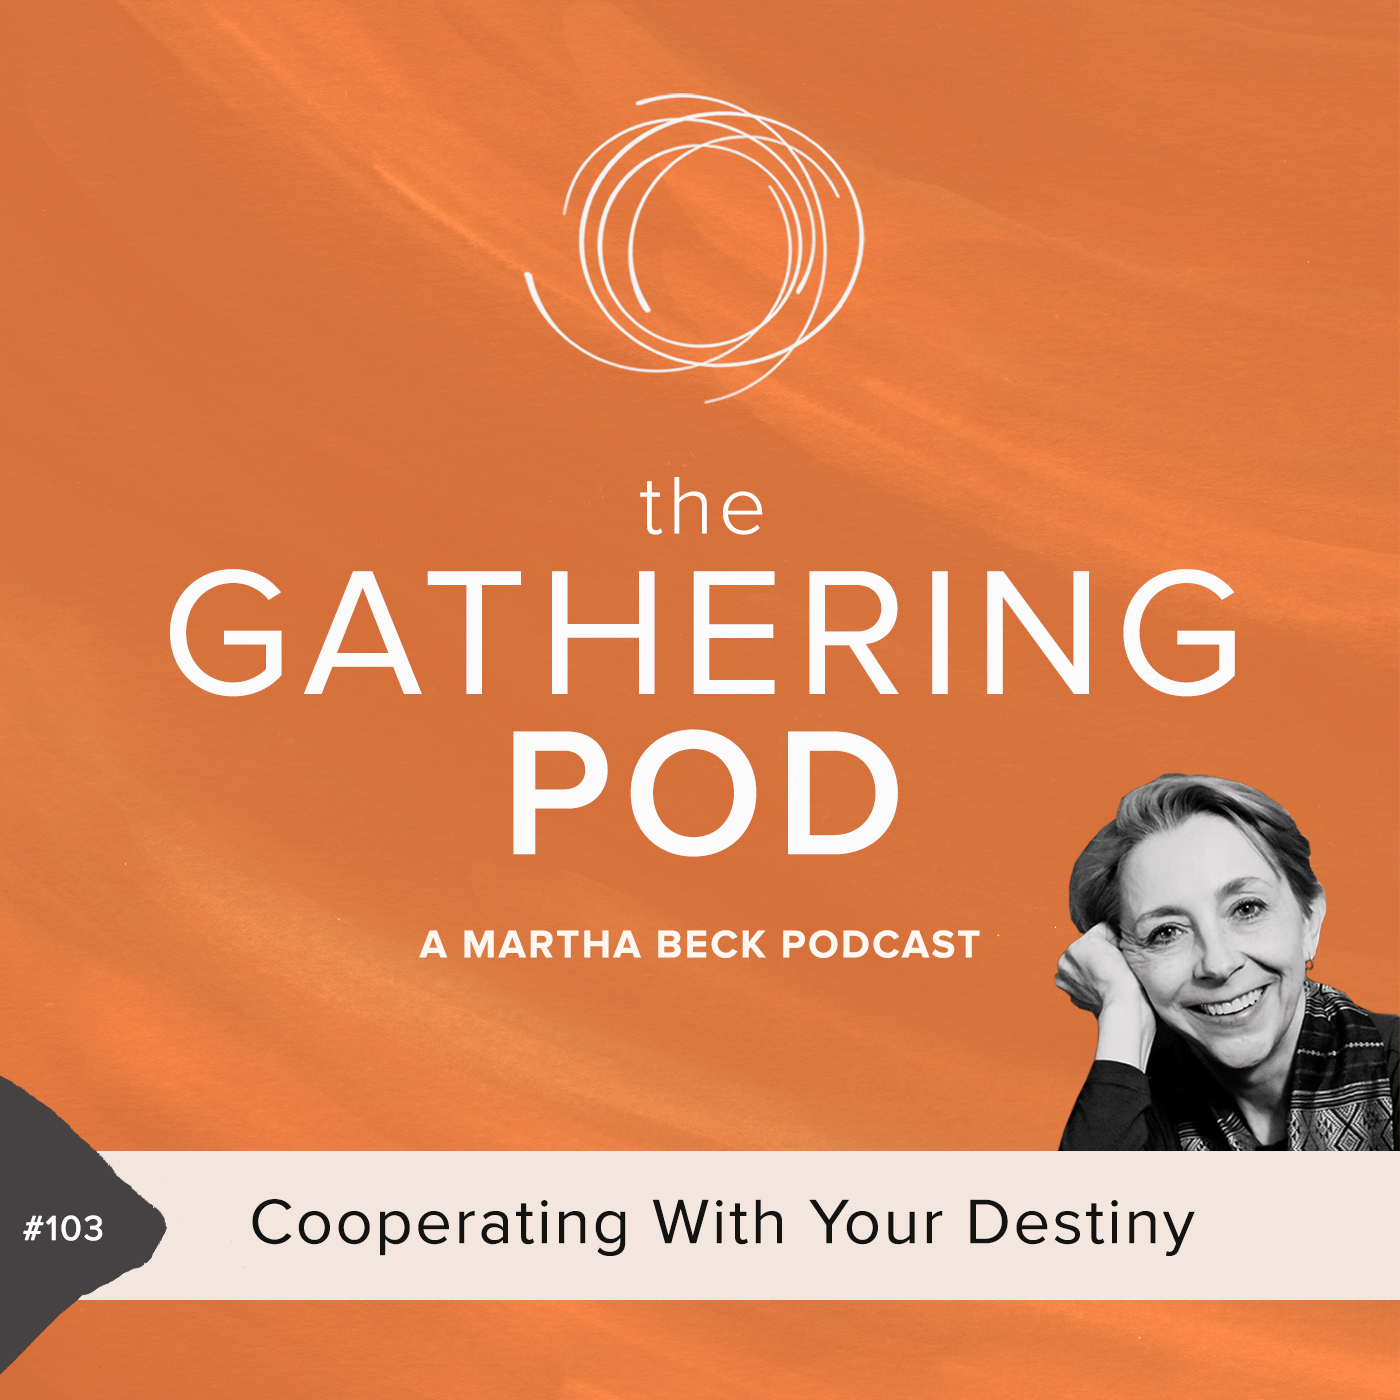 Image for The Gathering Pod A Martha Beck Podcast Episode #103 Cooperating With Your Destiny